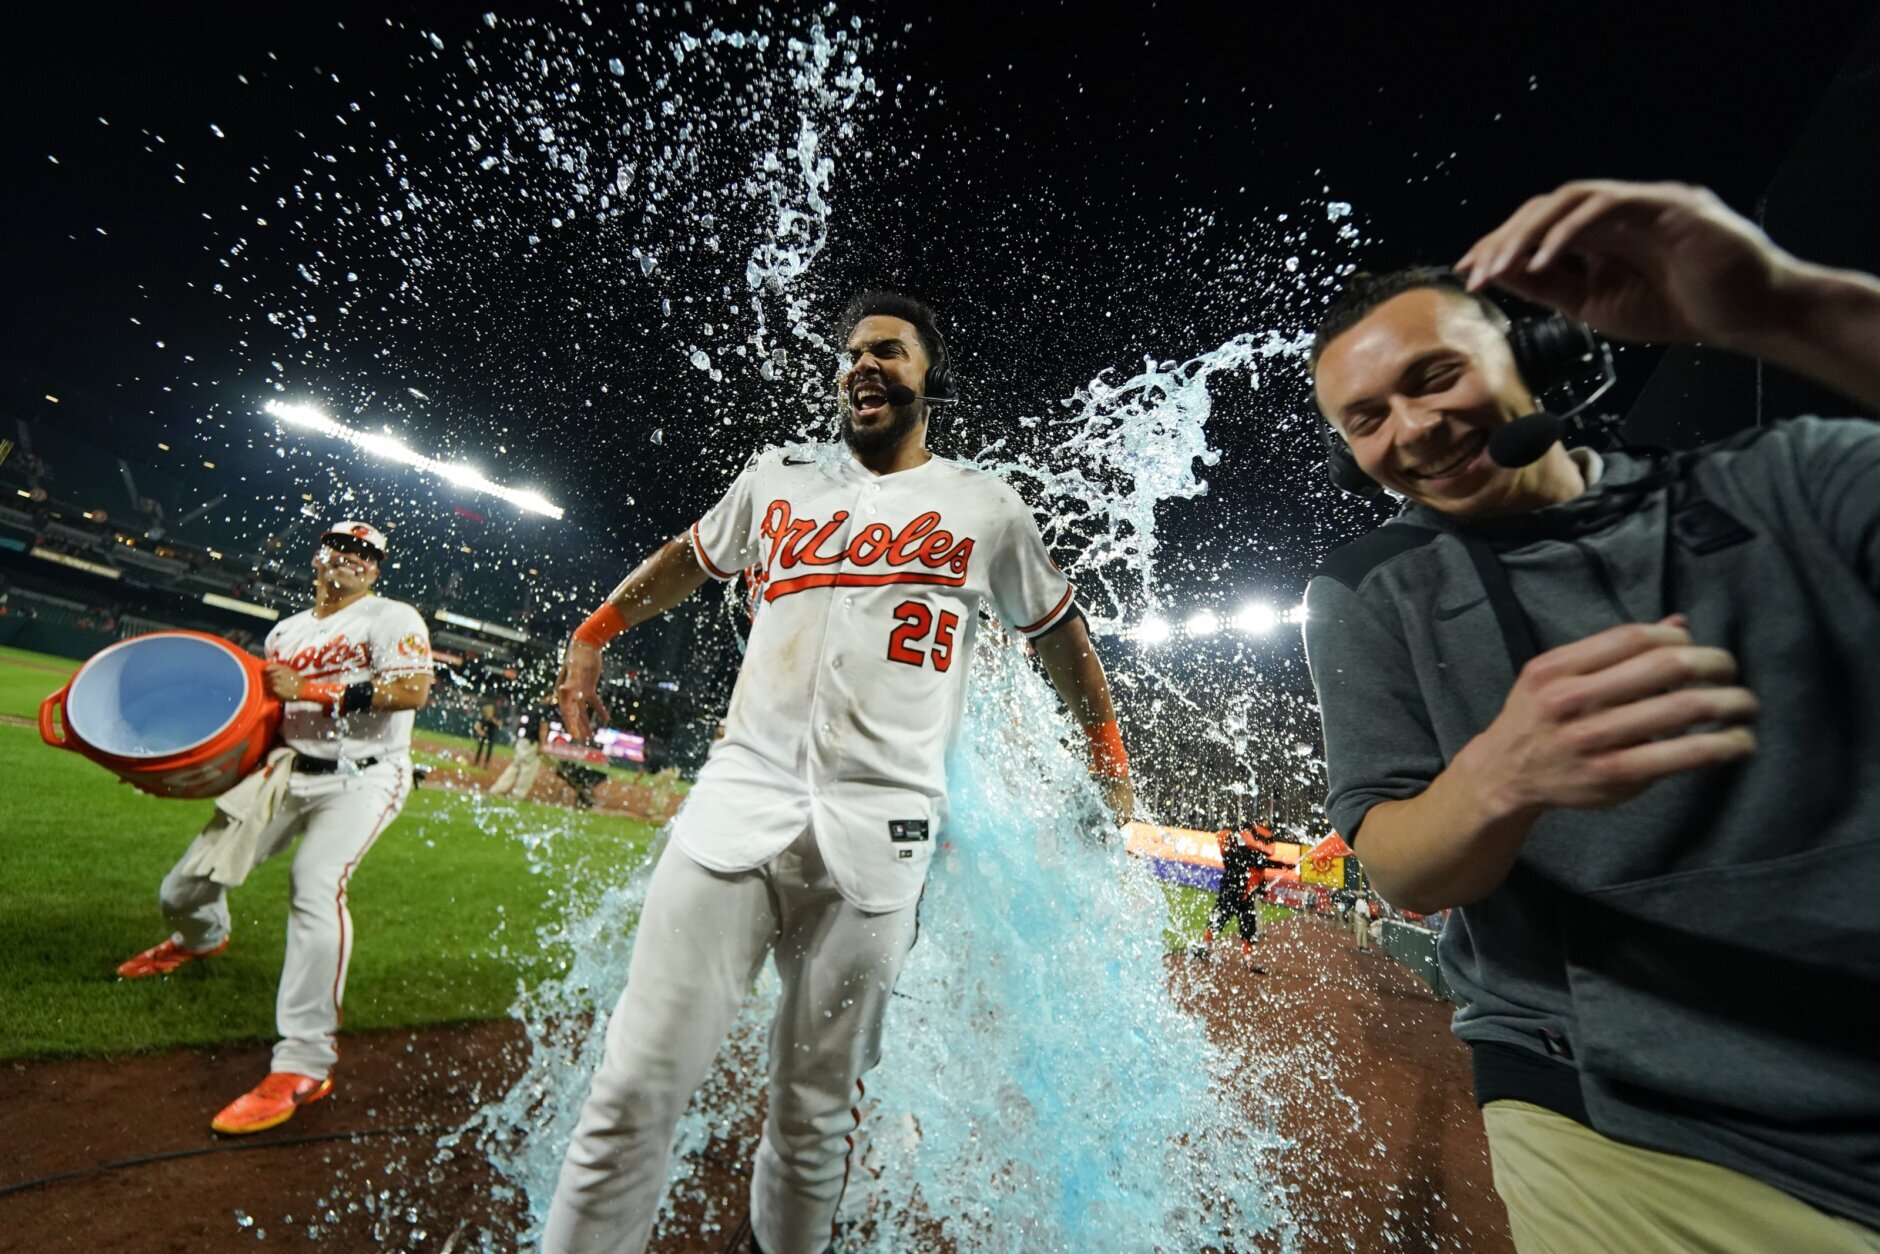 Stowers' HR in 9th ties it, Orioles top White Sox 4-3 in 11